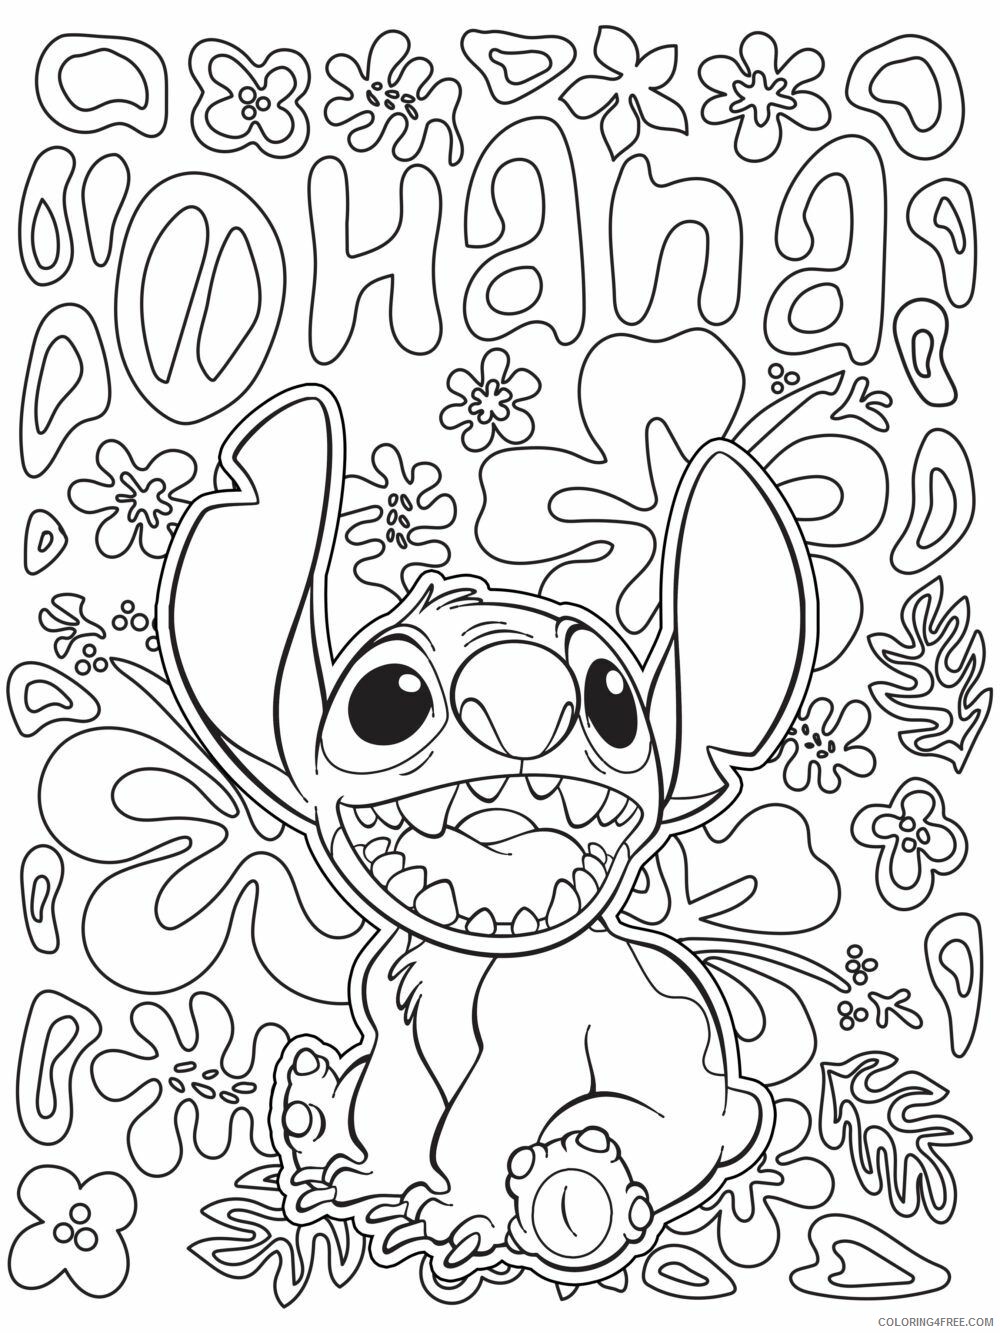 Stitch Coloring Pages Stitch Disney For Adults Printable 2021 5911 Coloring4free Coloring4free Com